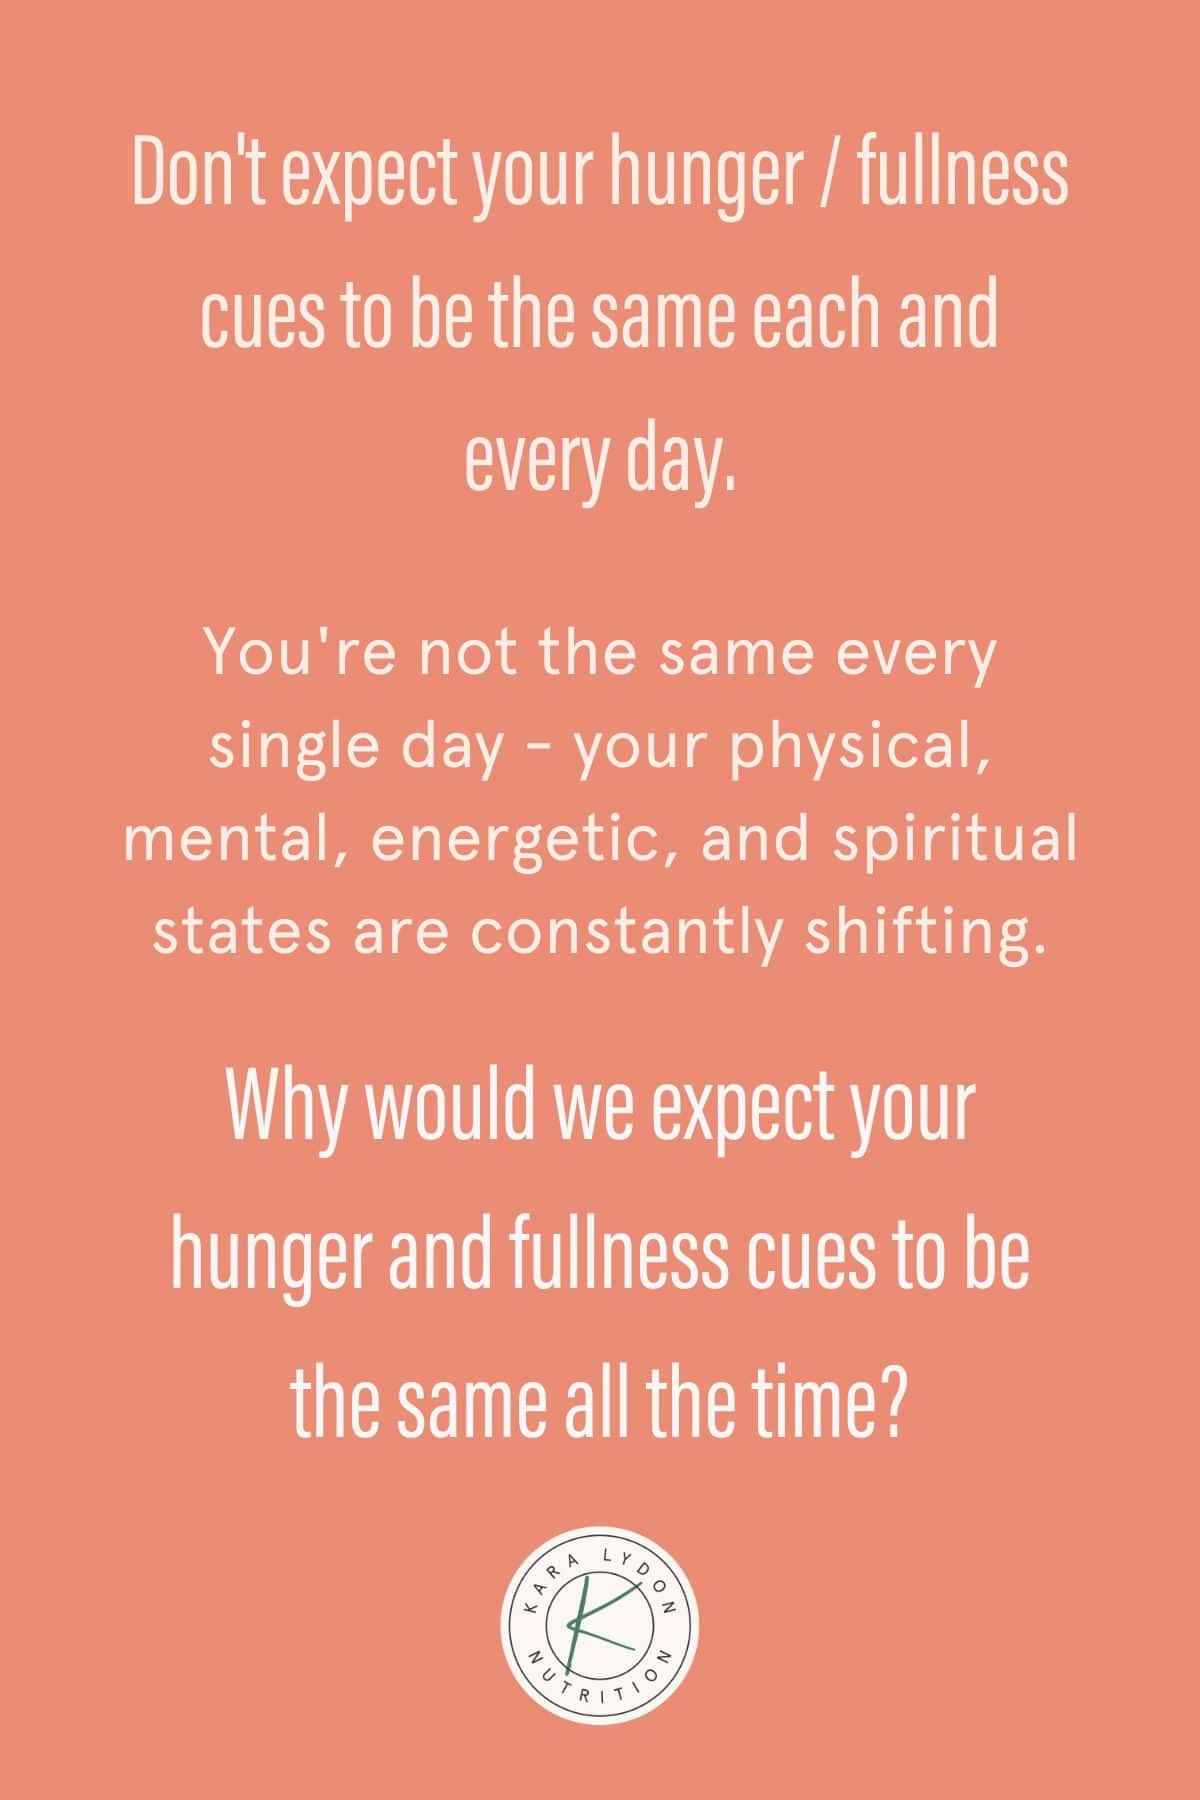 Graphic with quote: Don't expect your hunger/fullness cues to be the same each and every day